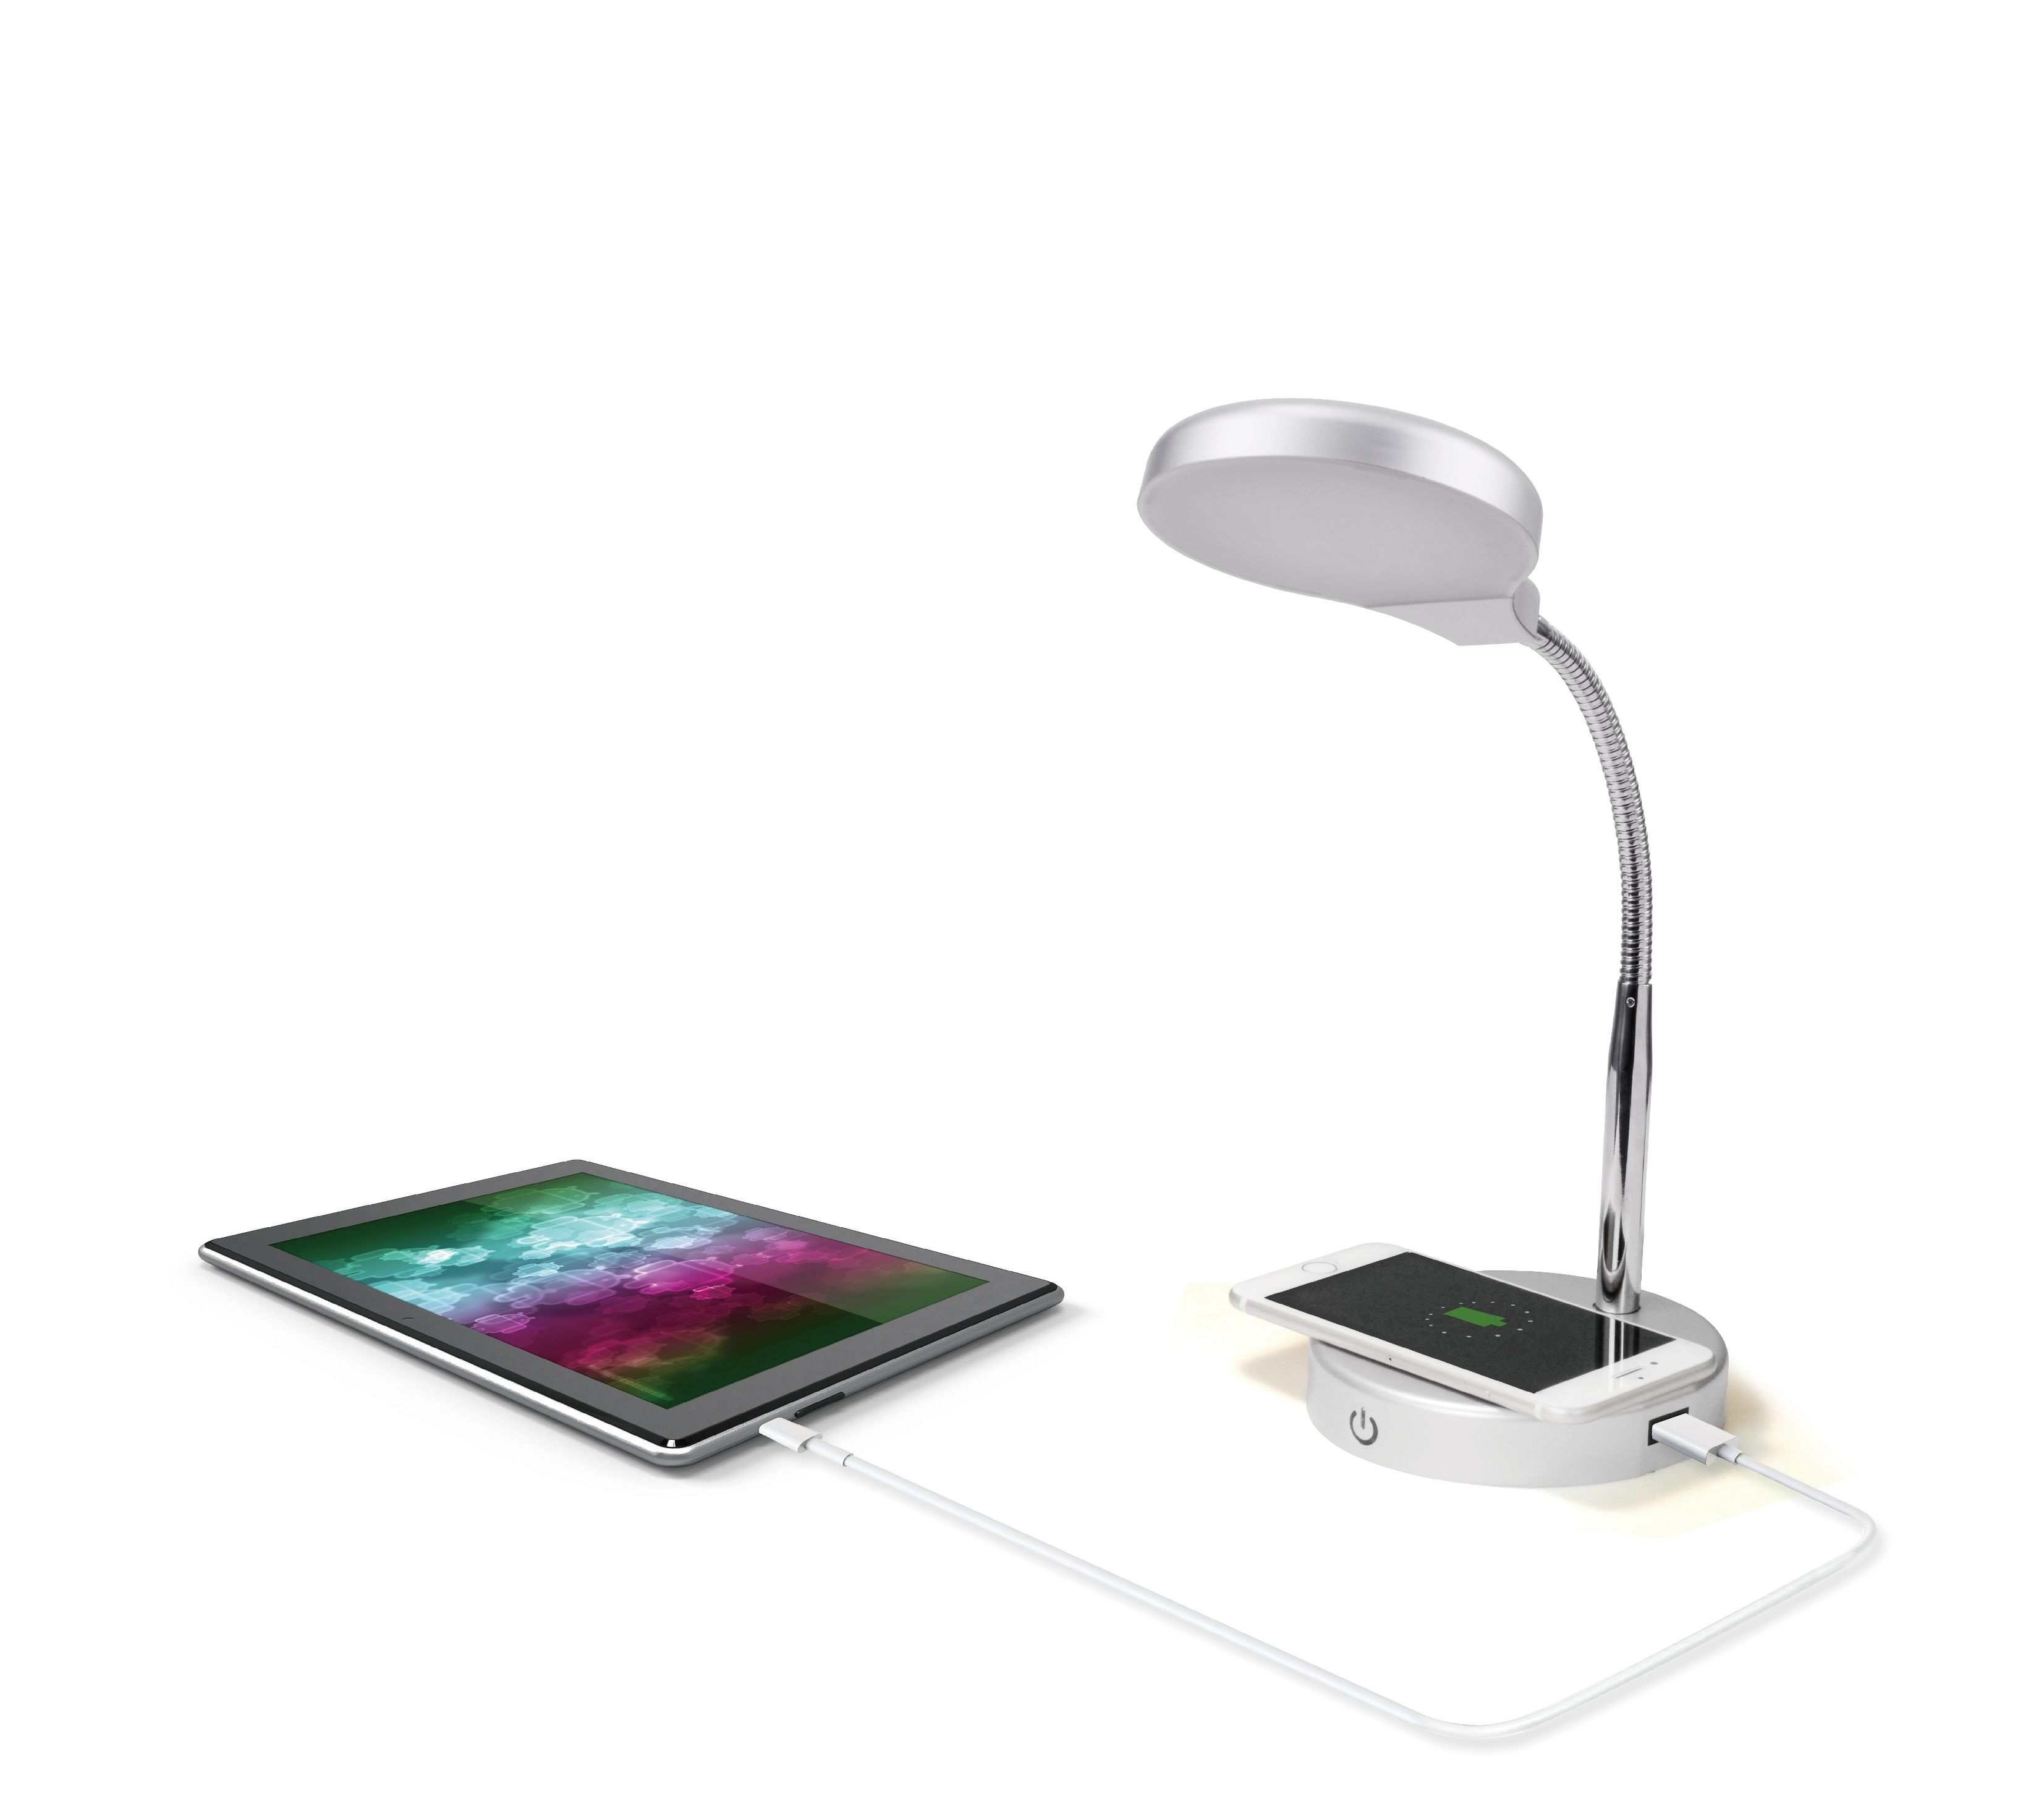 Home Wish List In 2019 Desk Lamp Led Desk Lamp Task Lamps with regard to dimensions 3307 X 2918